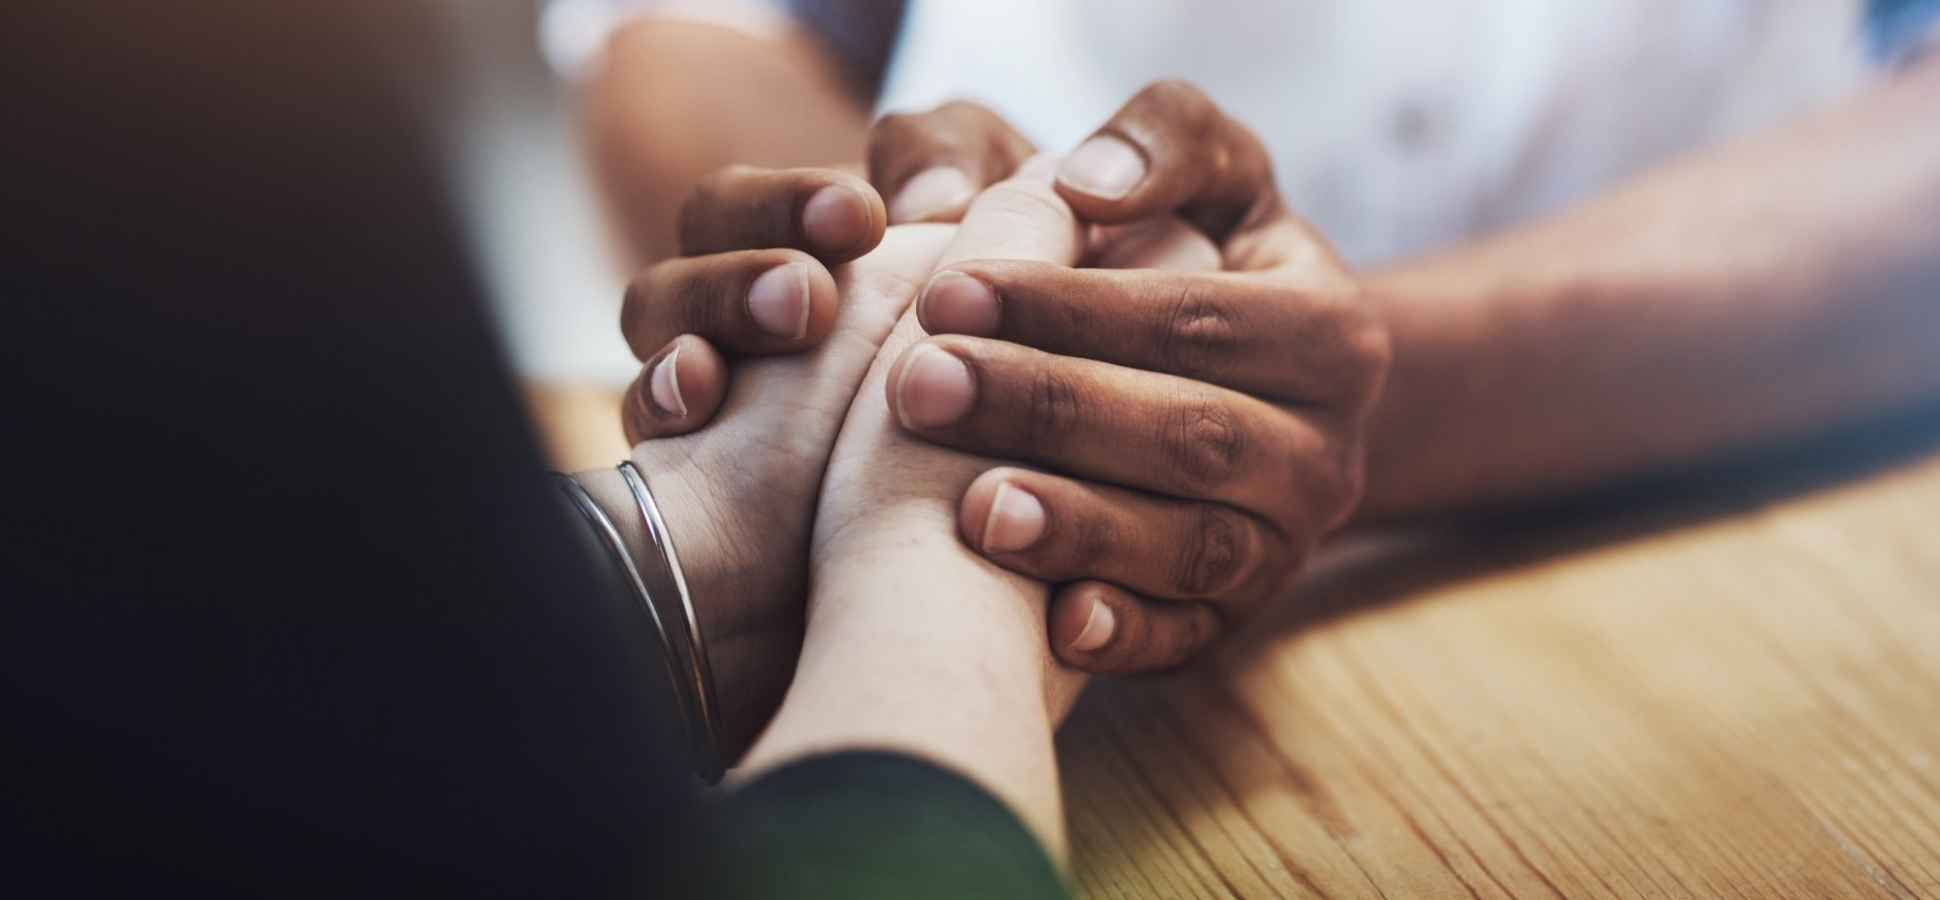 Empathy and cooperation go hand in hand